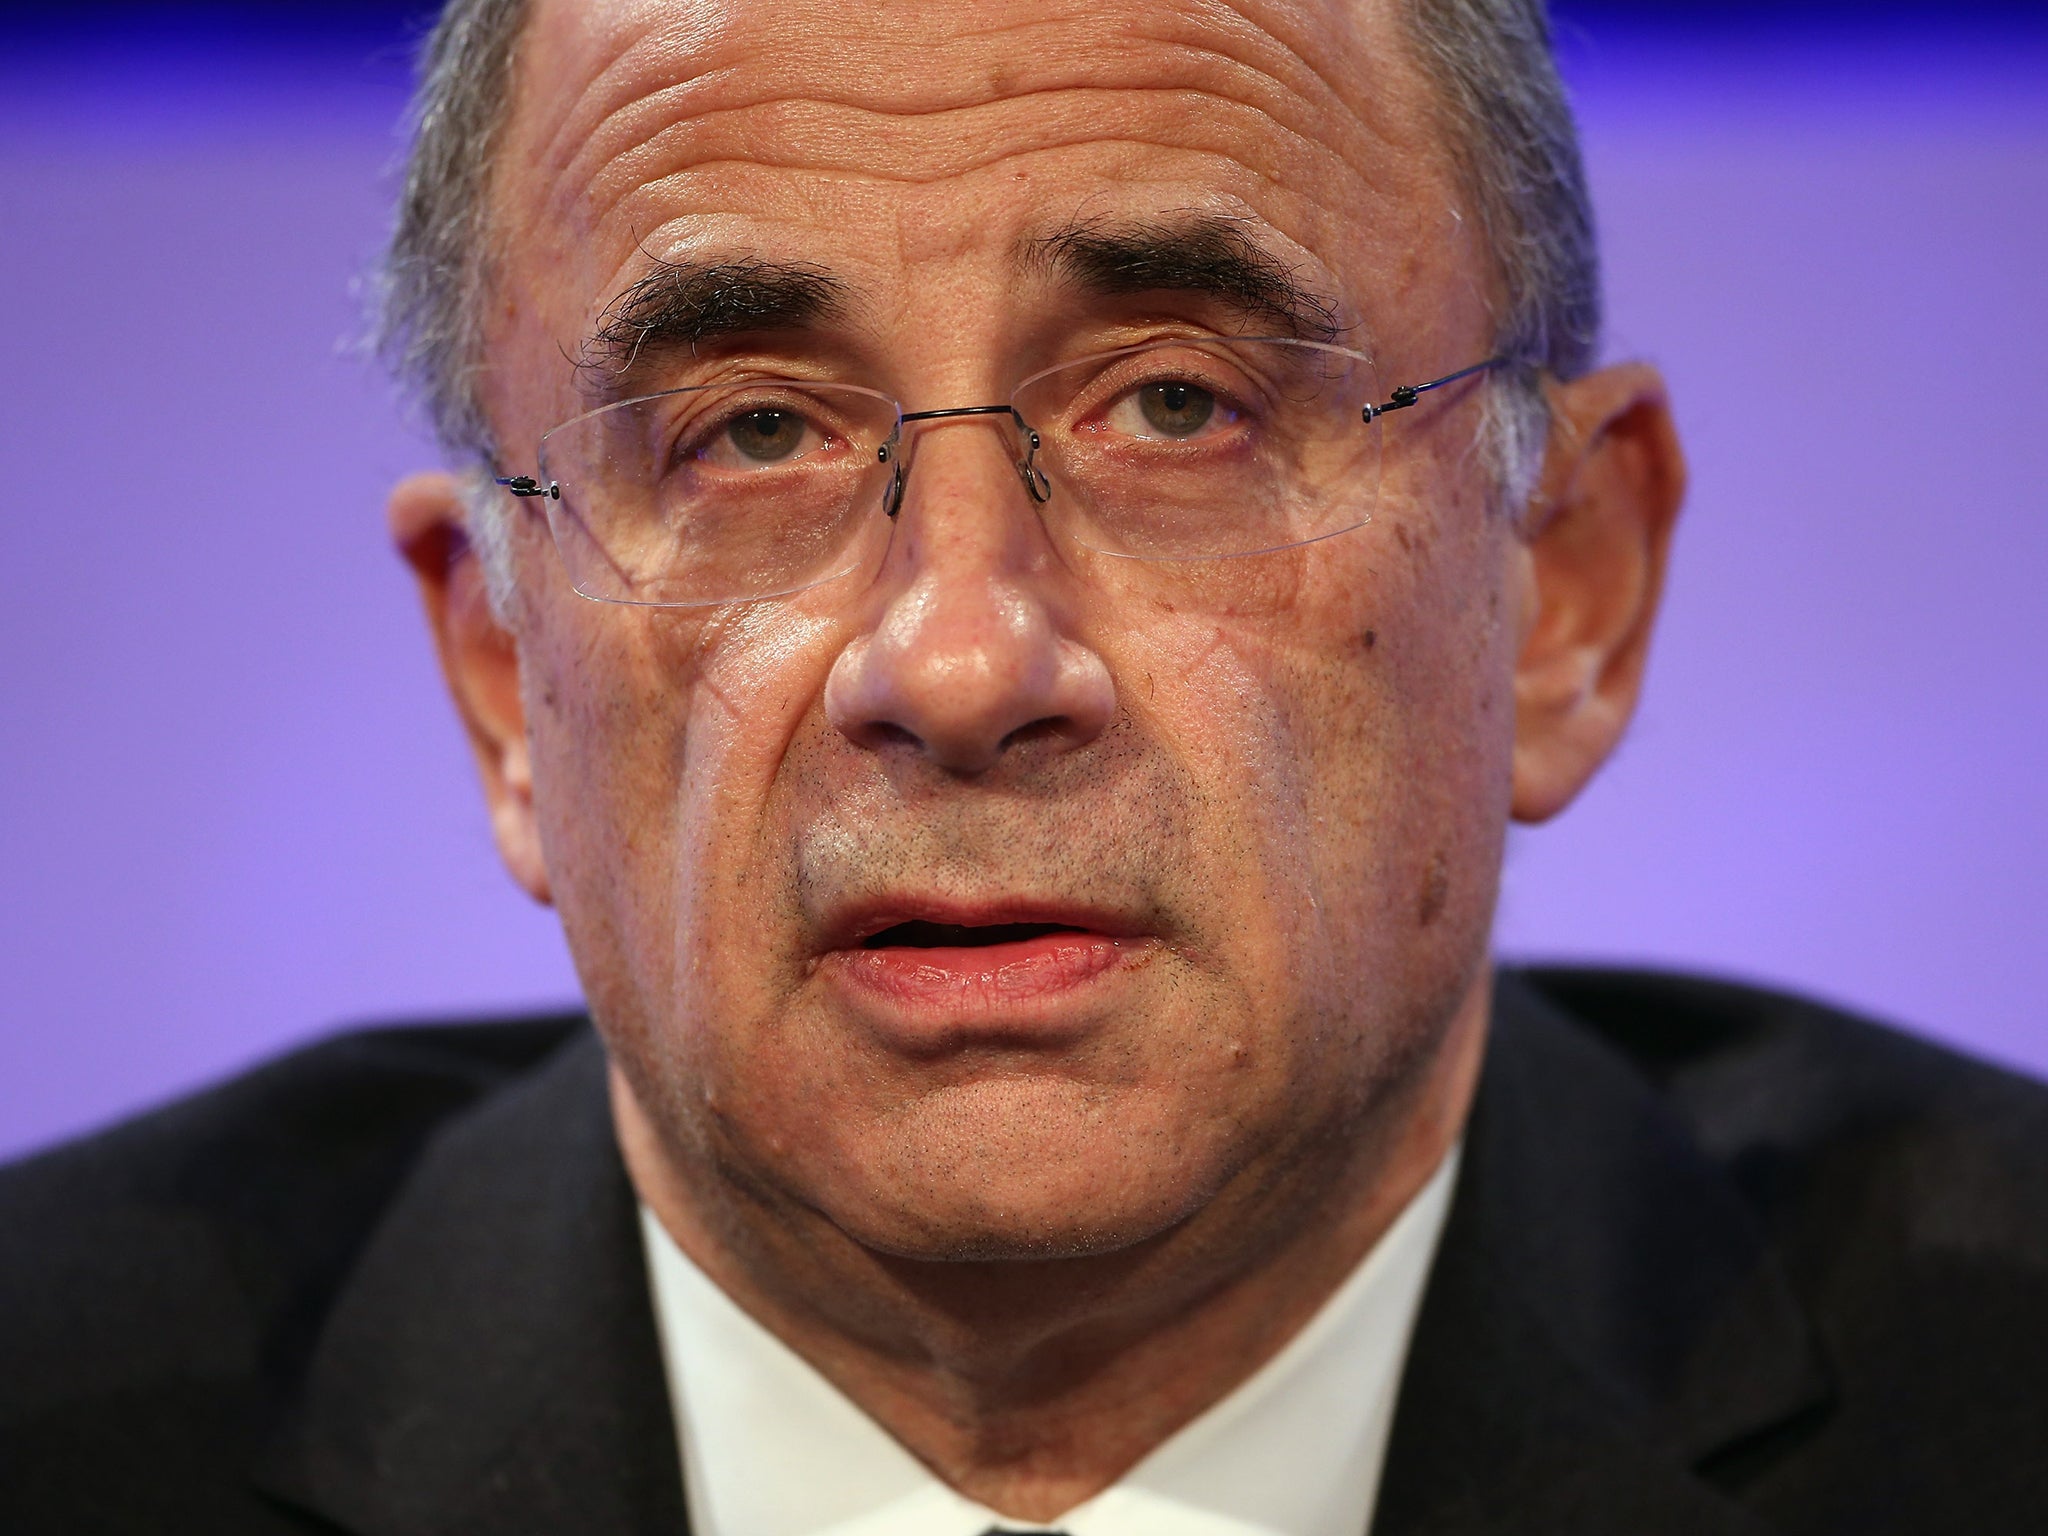 Sir Brian Leveson was appointed in 2011 to head an investigation into Britain’s press